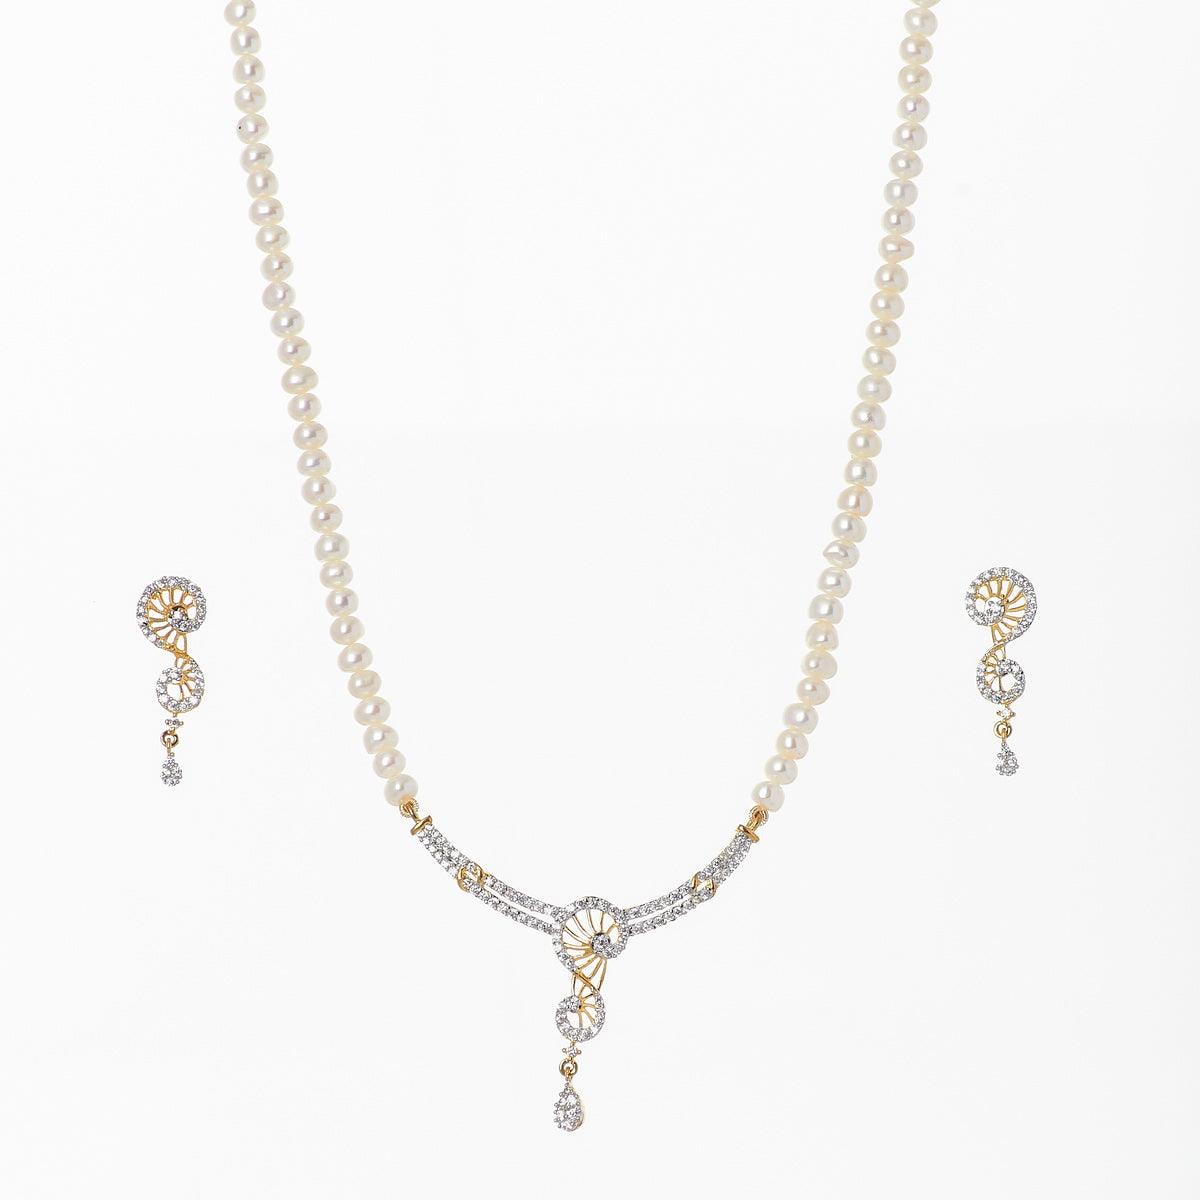 Mangalsutra Design Pearl Necklace Set - Chandrani Pearls